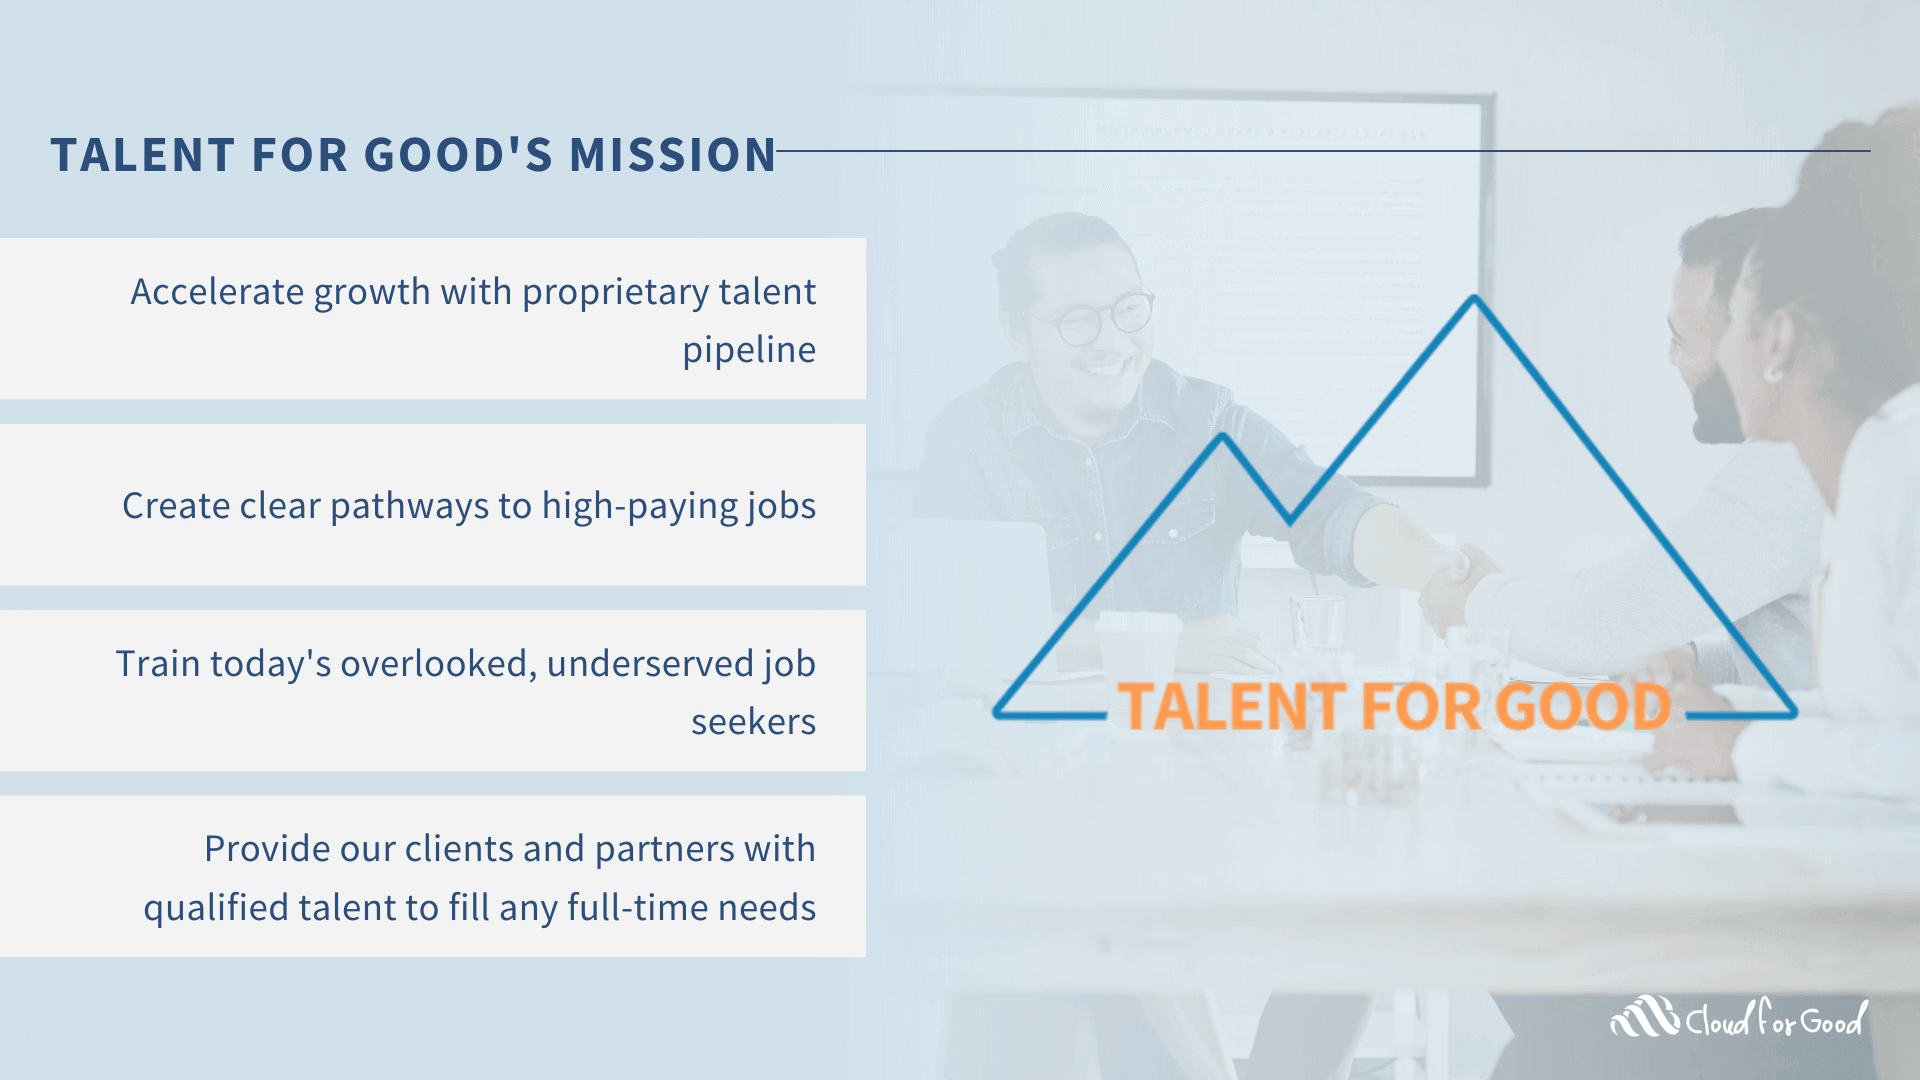 Talent for Good's Mission